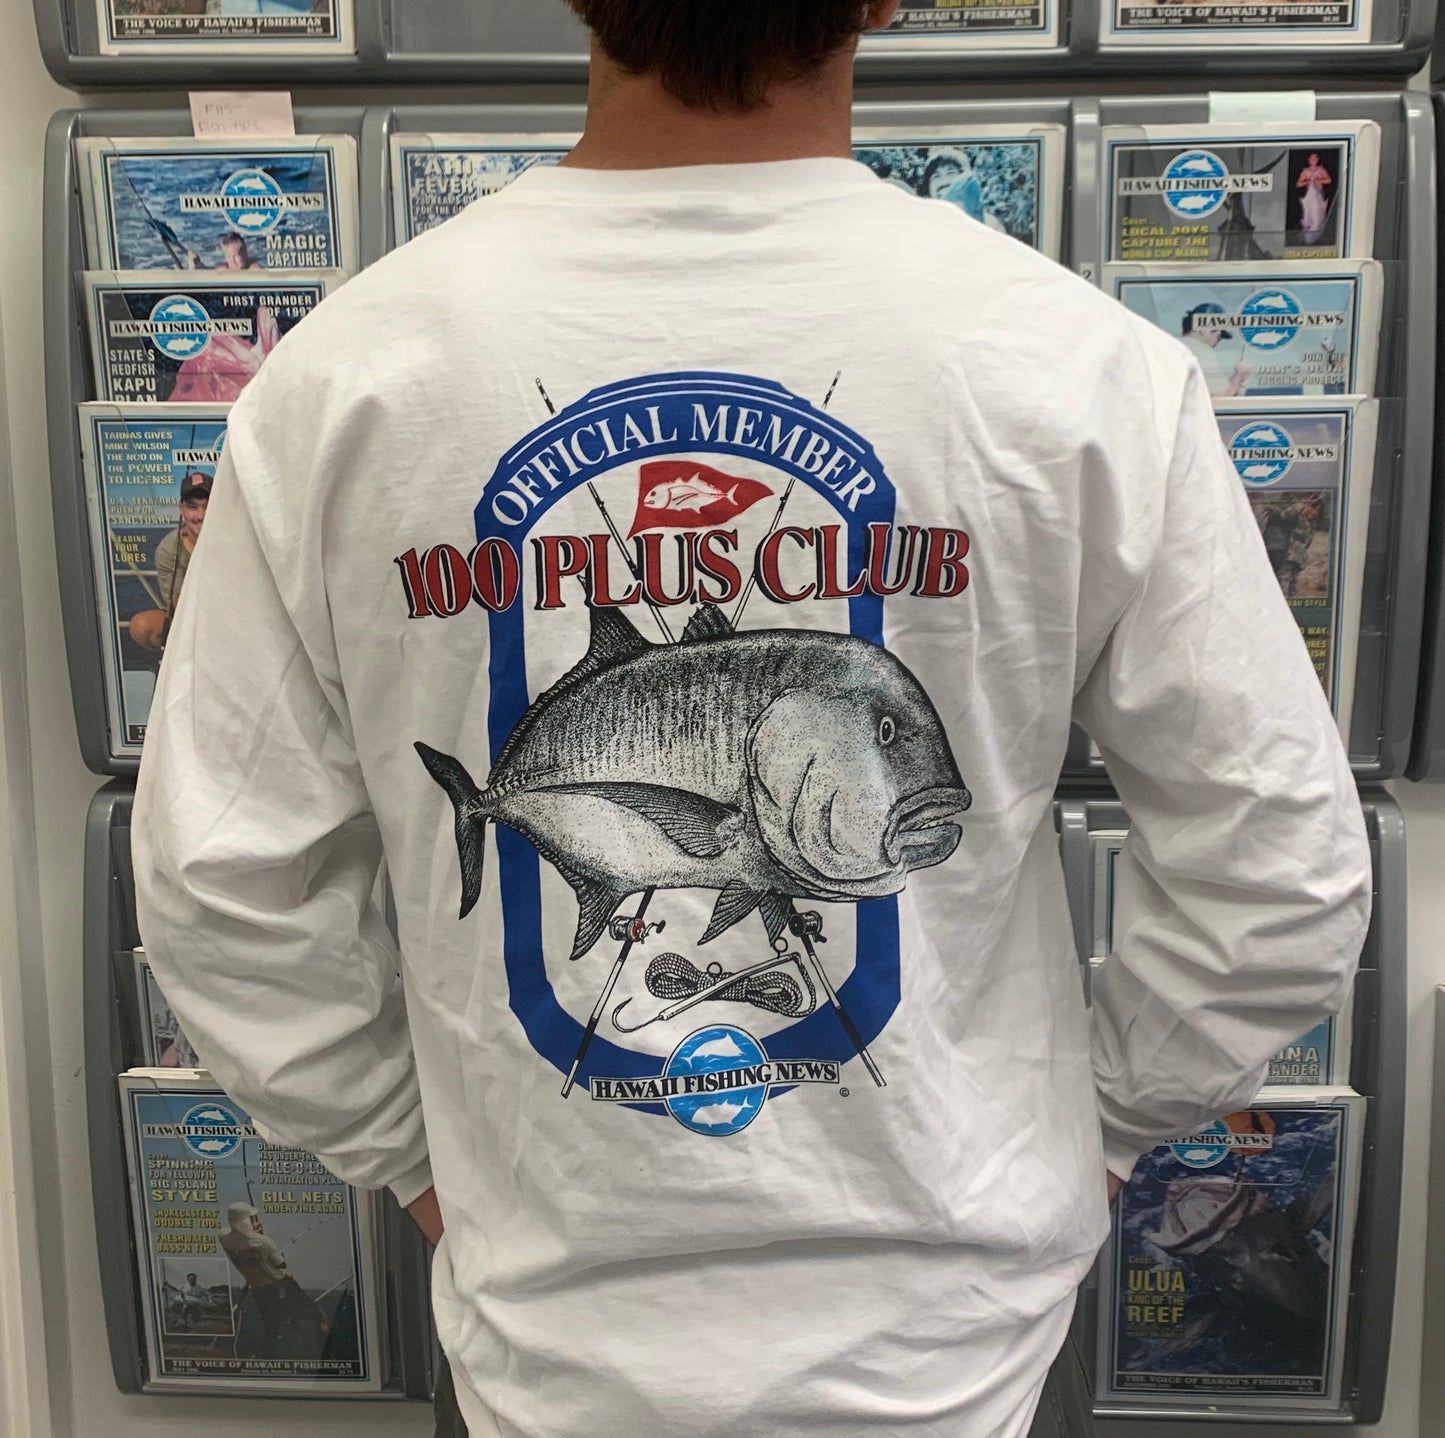 100-Plus Club Member Long & Short Sleeve Shirts SALE - LIMITED SUPPLY / 3Xs TOO!